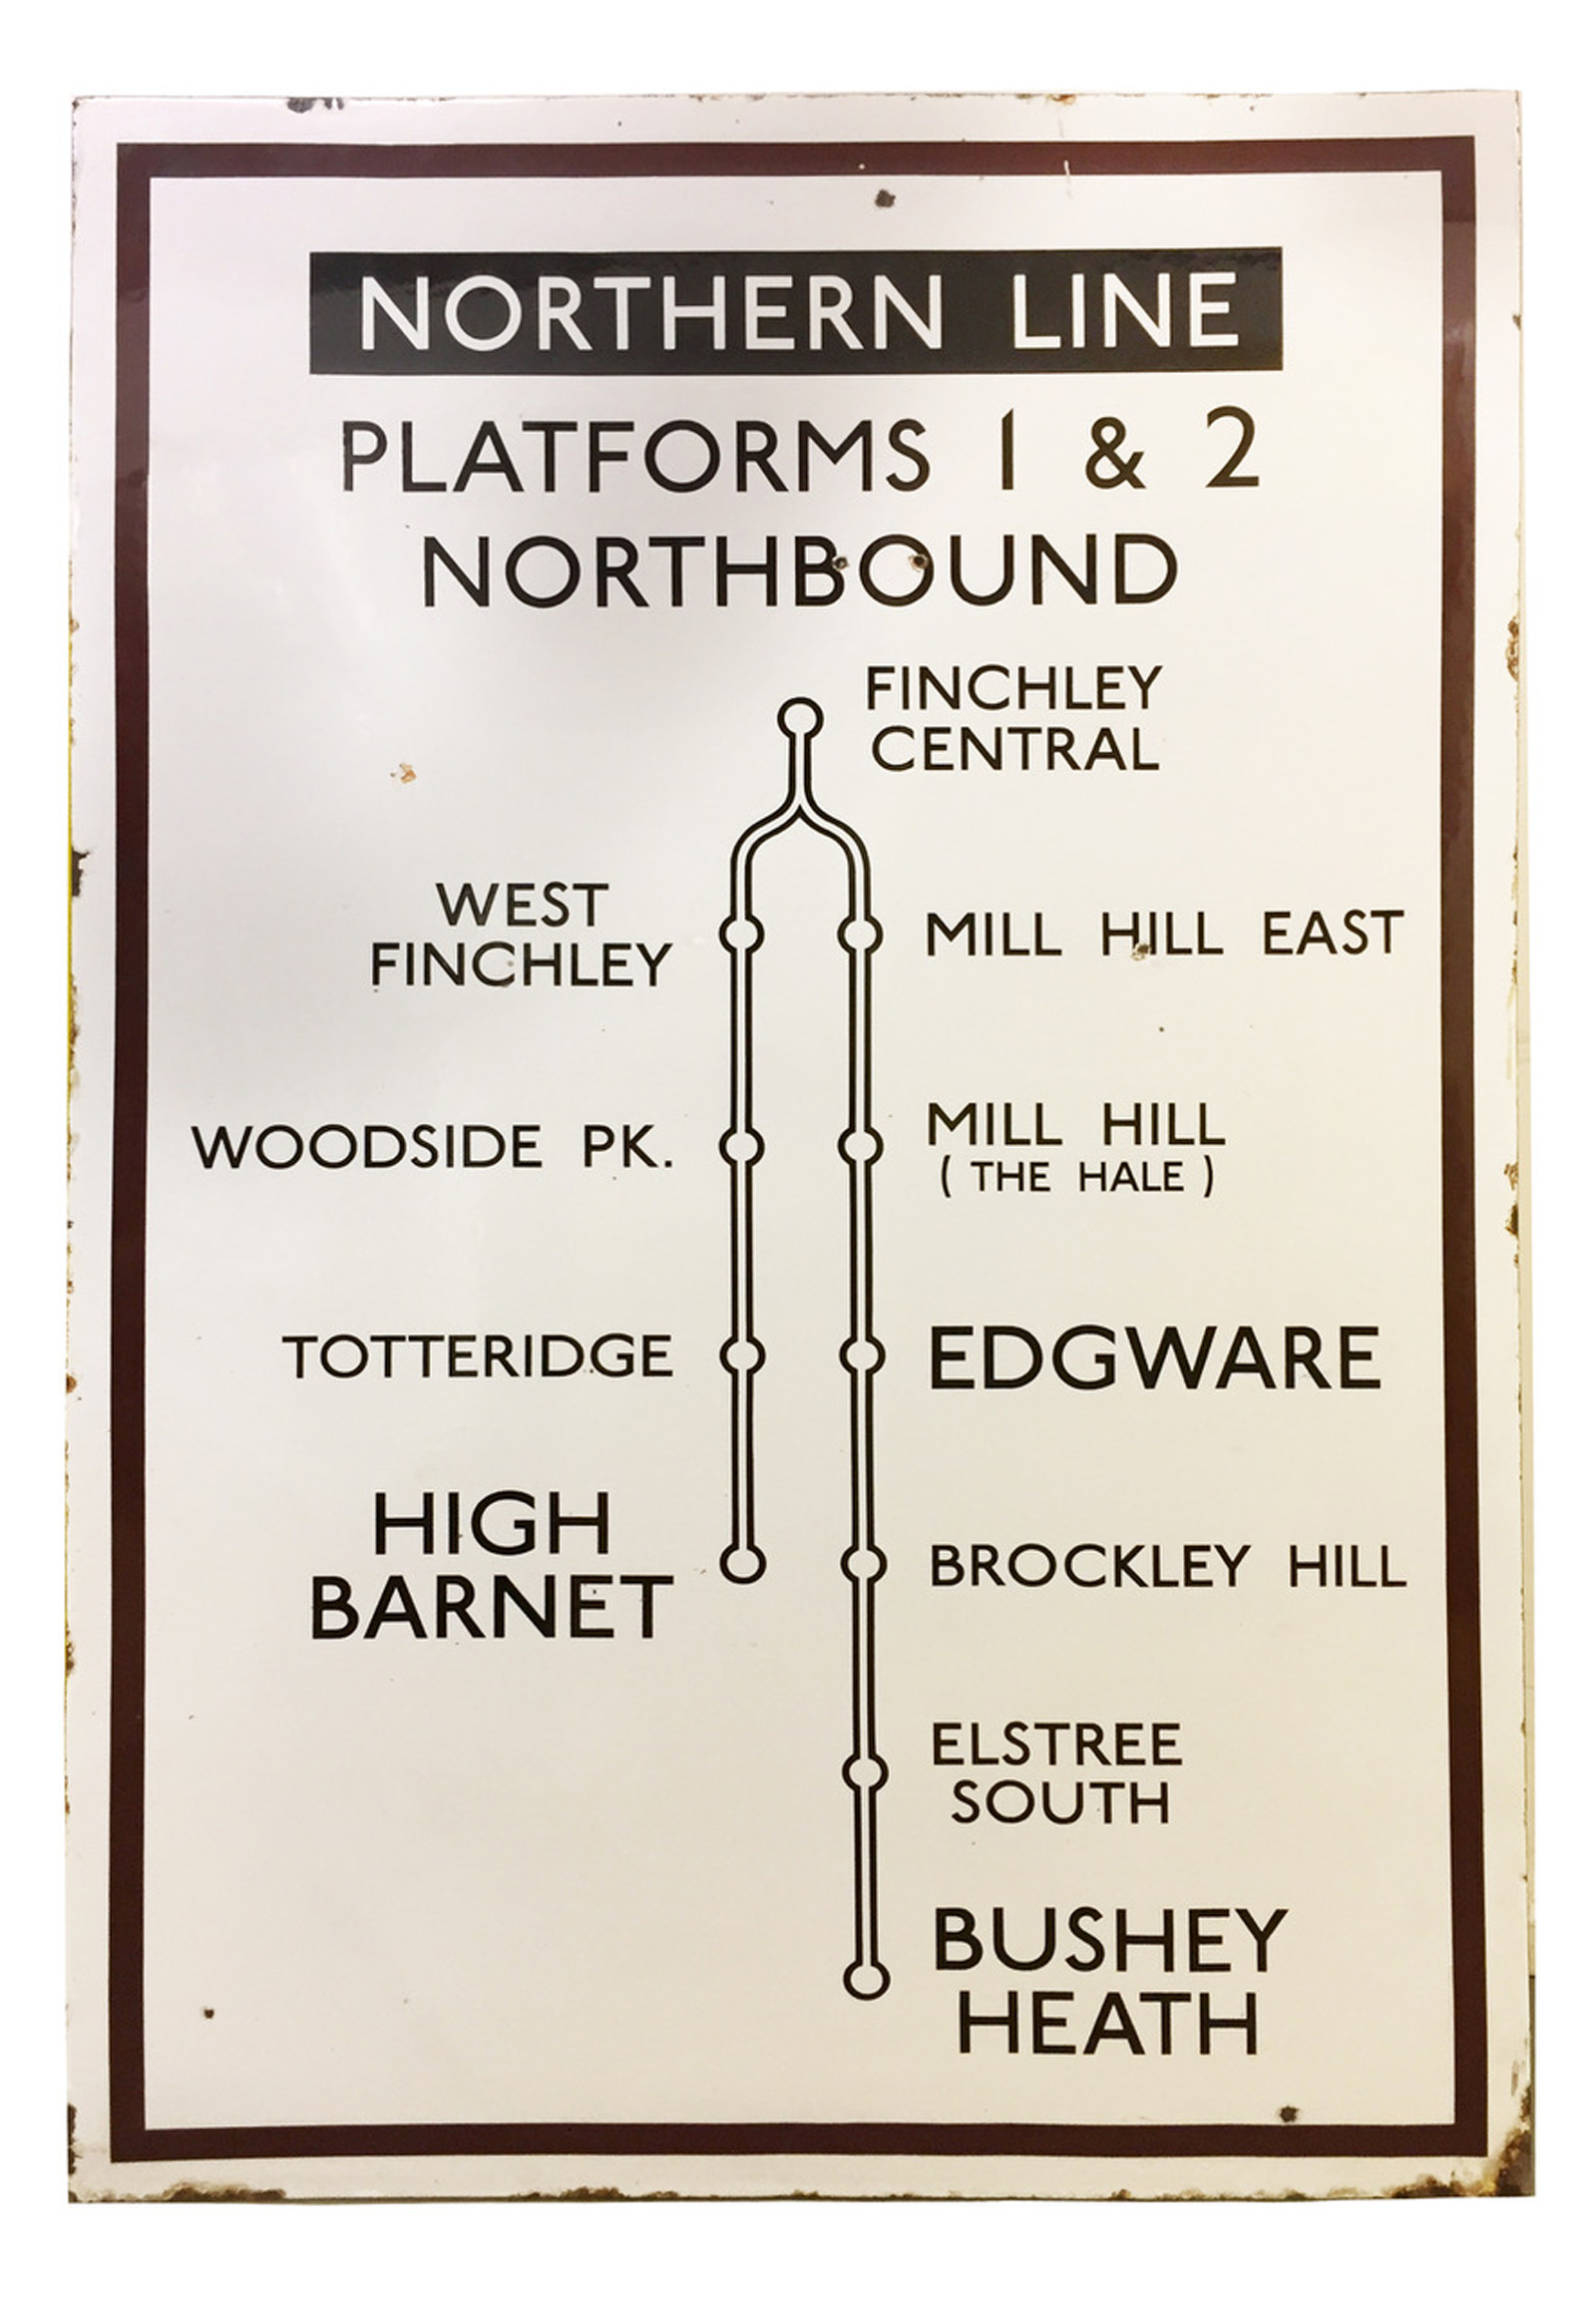 The Northern Line extension to Bushey Heath never happened but it did not stop signs being made. The enamel sign is expected to sell for between £800 and £1200 (Catherine Southon Auctioneers & Valuers/PA)